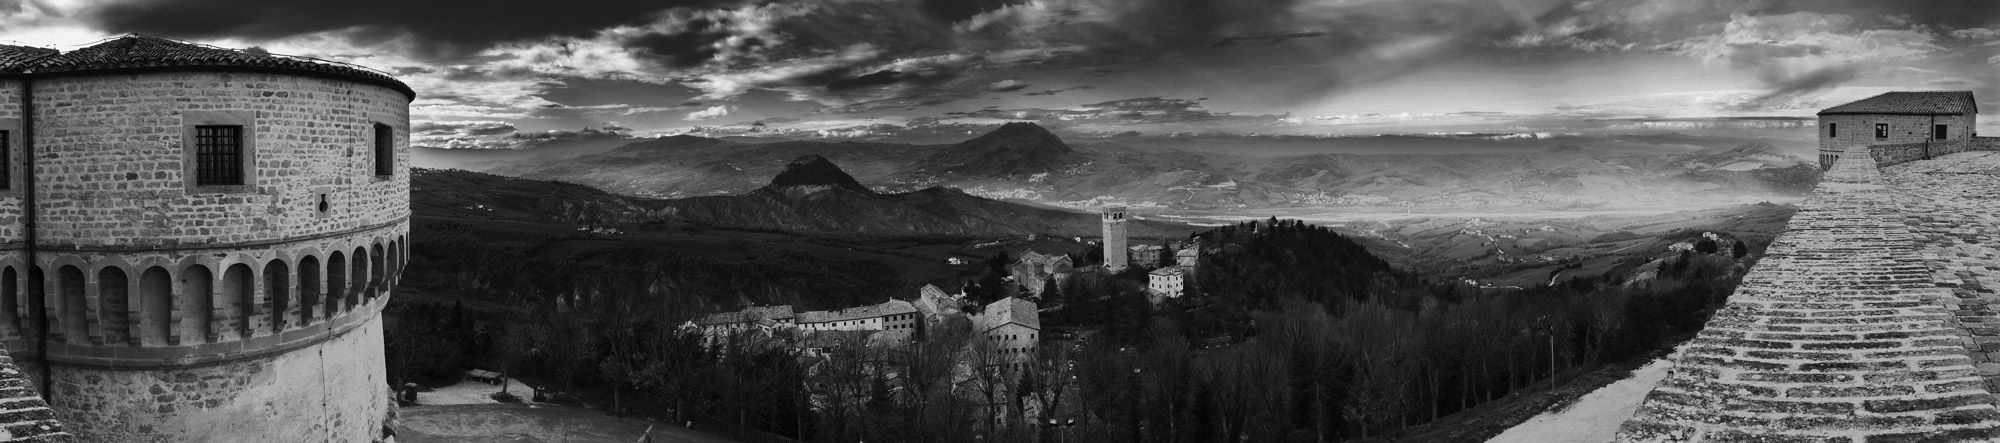 San Leo (from Rocca)...